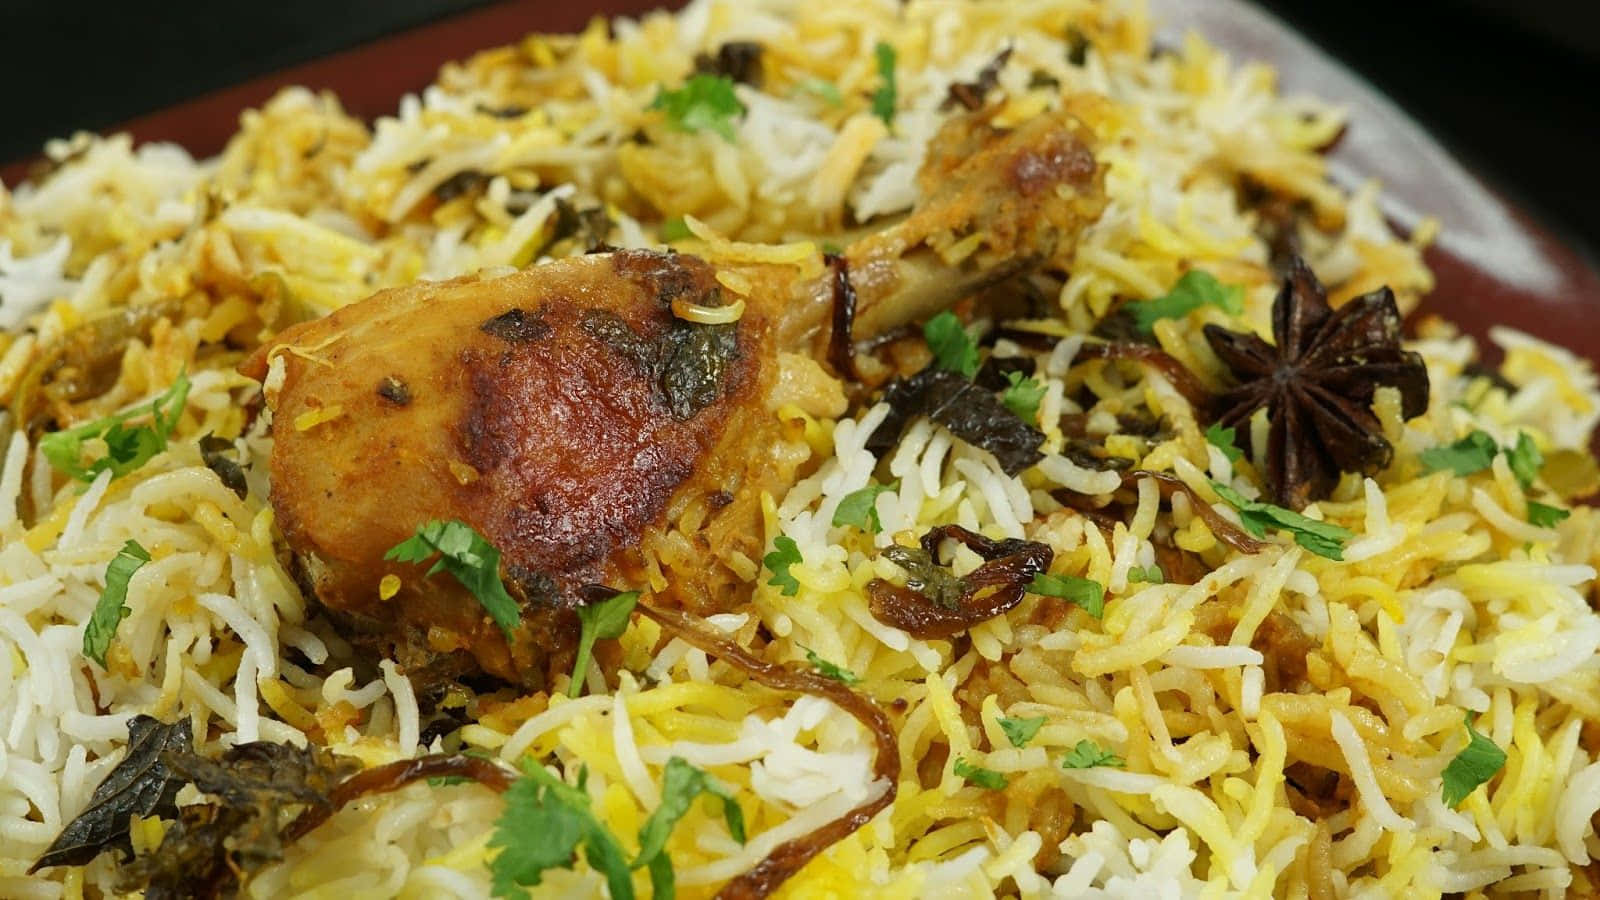 Mouthwatering and Authentic Biryani